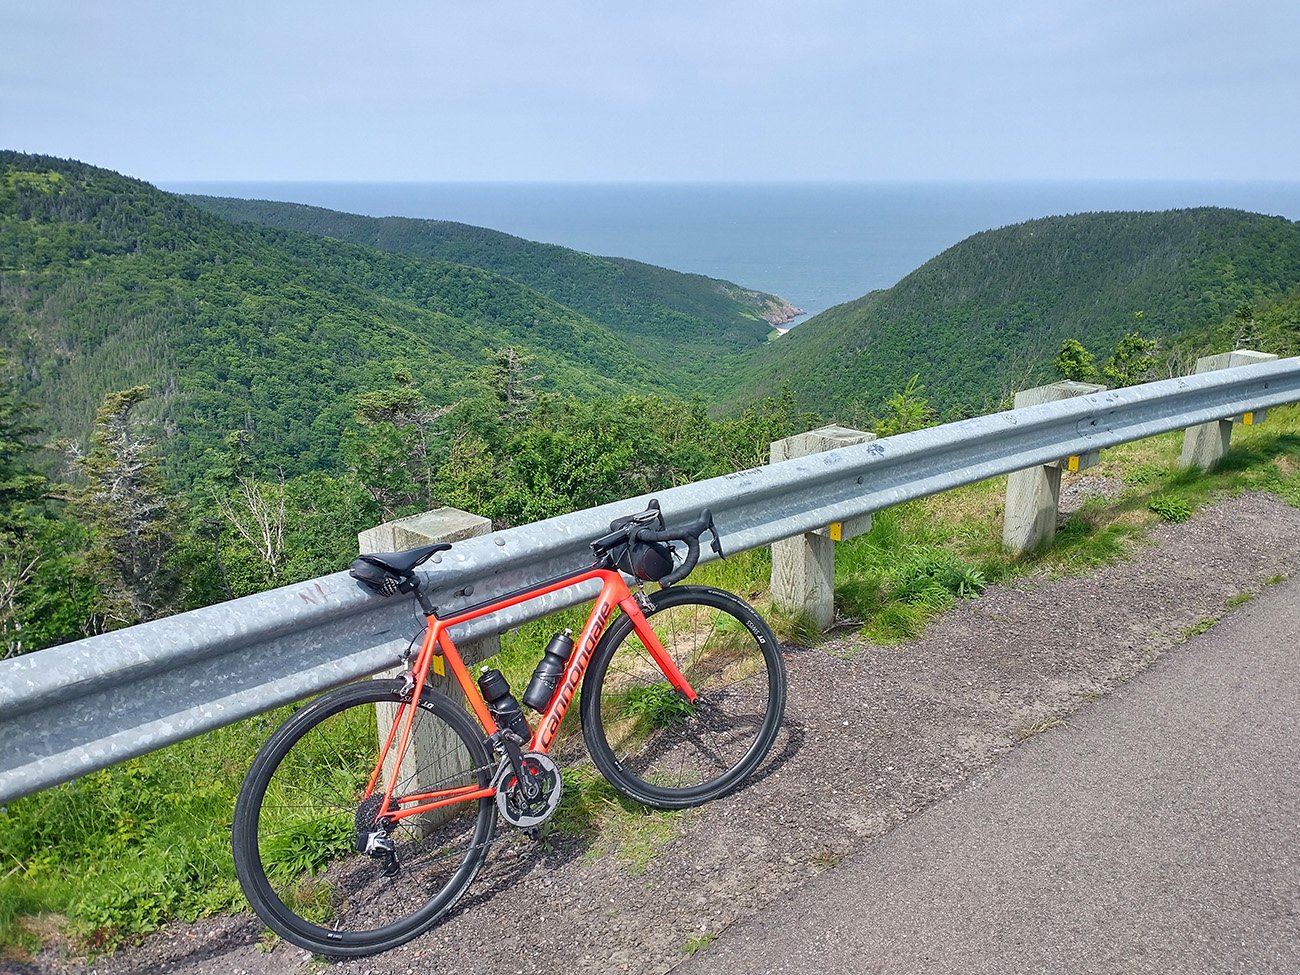 View from the top of the first and highest climb that descents into Pleasant Bay.